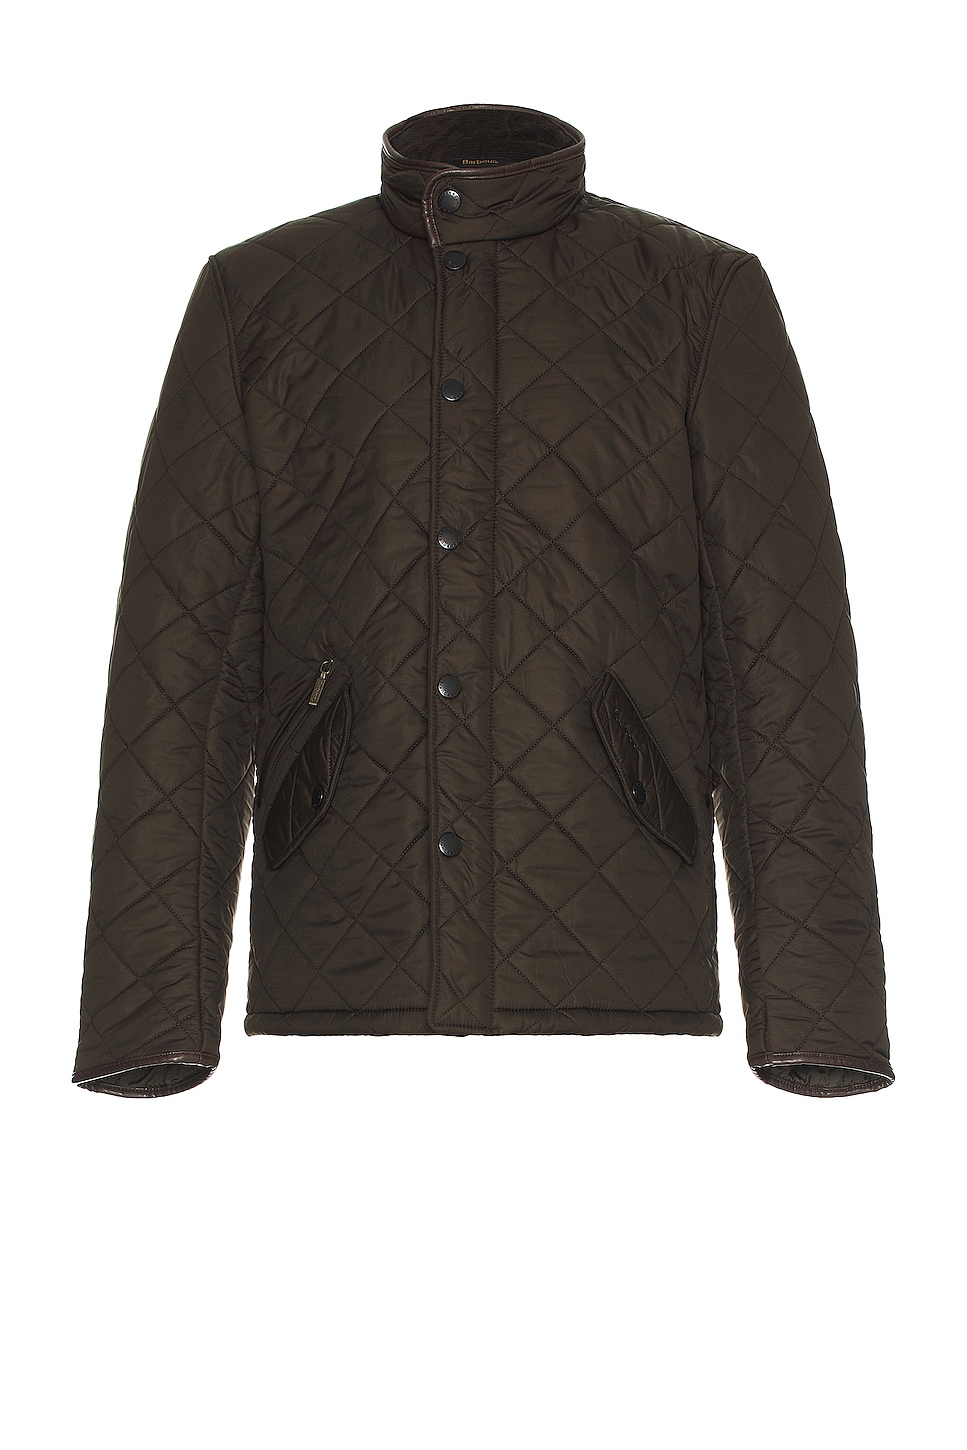 Image 1 of Barbour Powell Quilt Jacket in Green